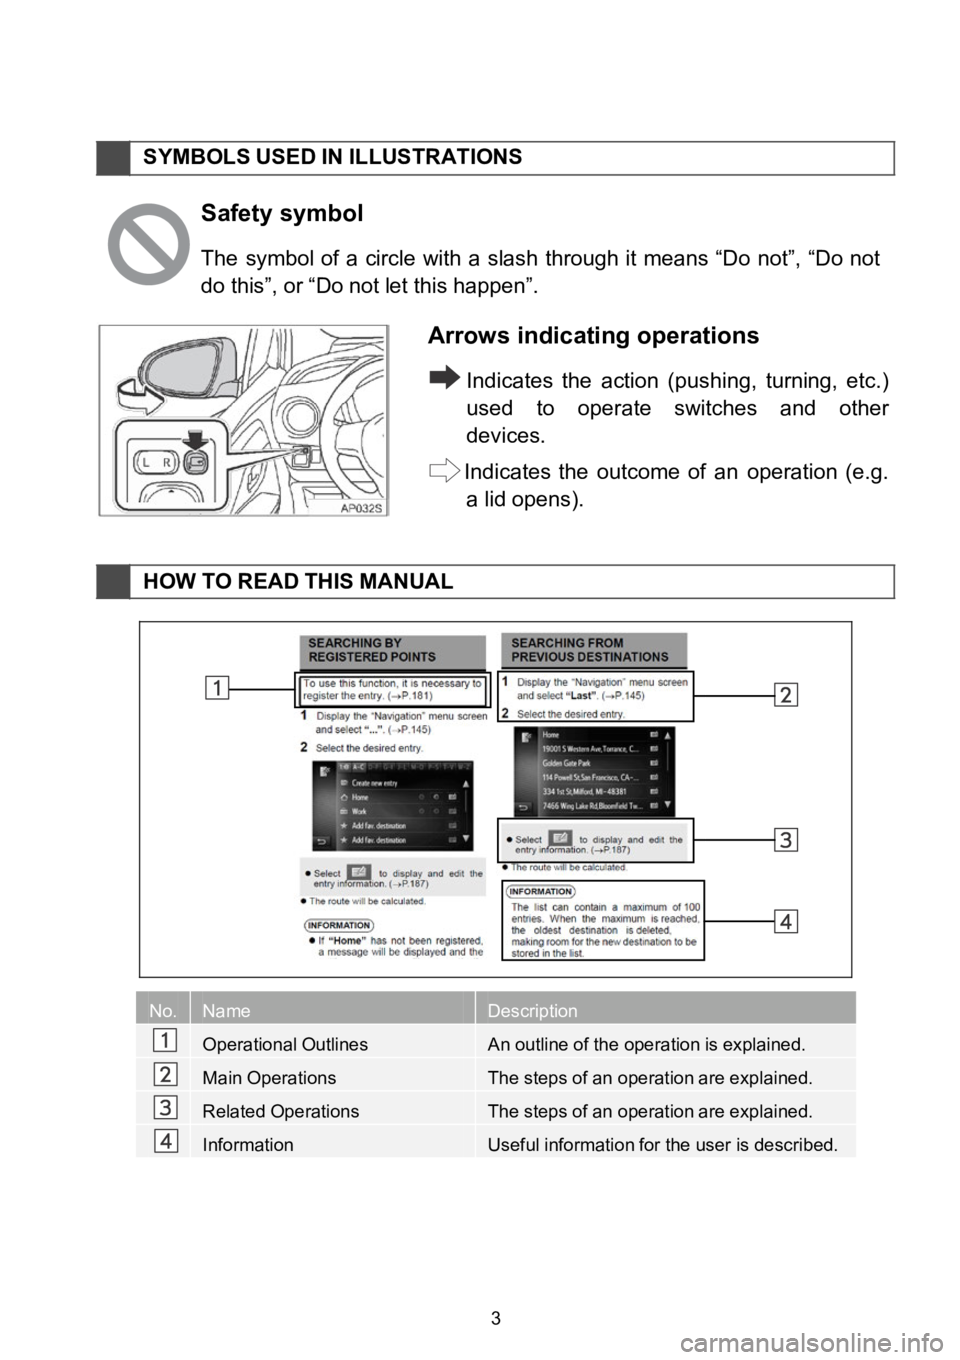 TOYOTA GT86 2018  Accessories, Audio & Navigation (in English) SYMBOLS USED INILLUSTR ATIONS
Safety symbol
Thesymbol ofa c ircle witha slash through itmeans “Donot”, “Donot 
do this”, or “Donotletthis happen”.
Arrows indicating operatio ns
Indicates t